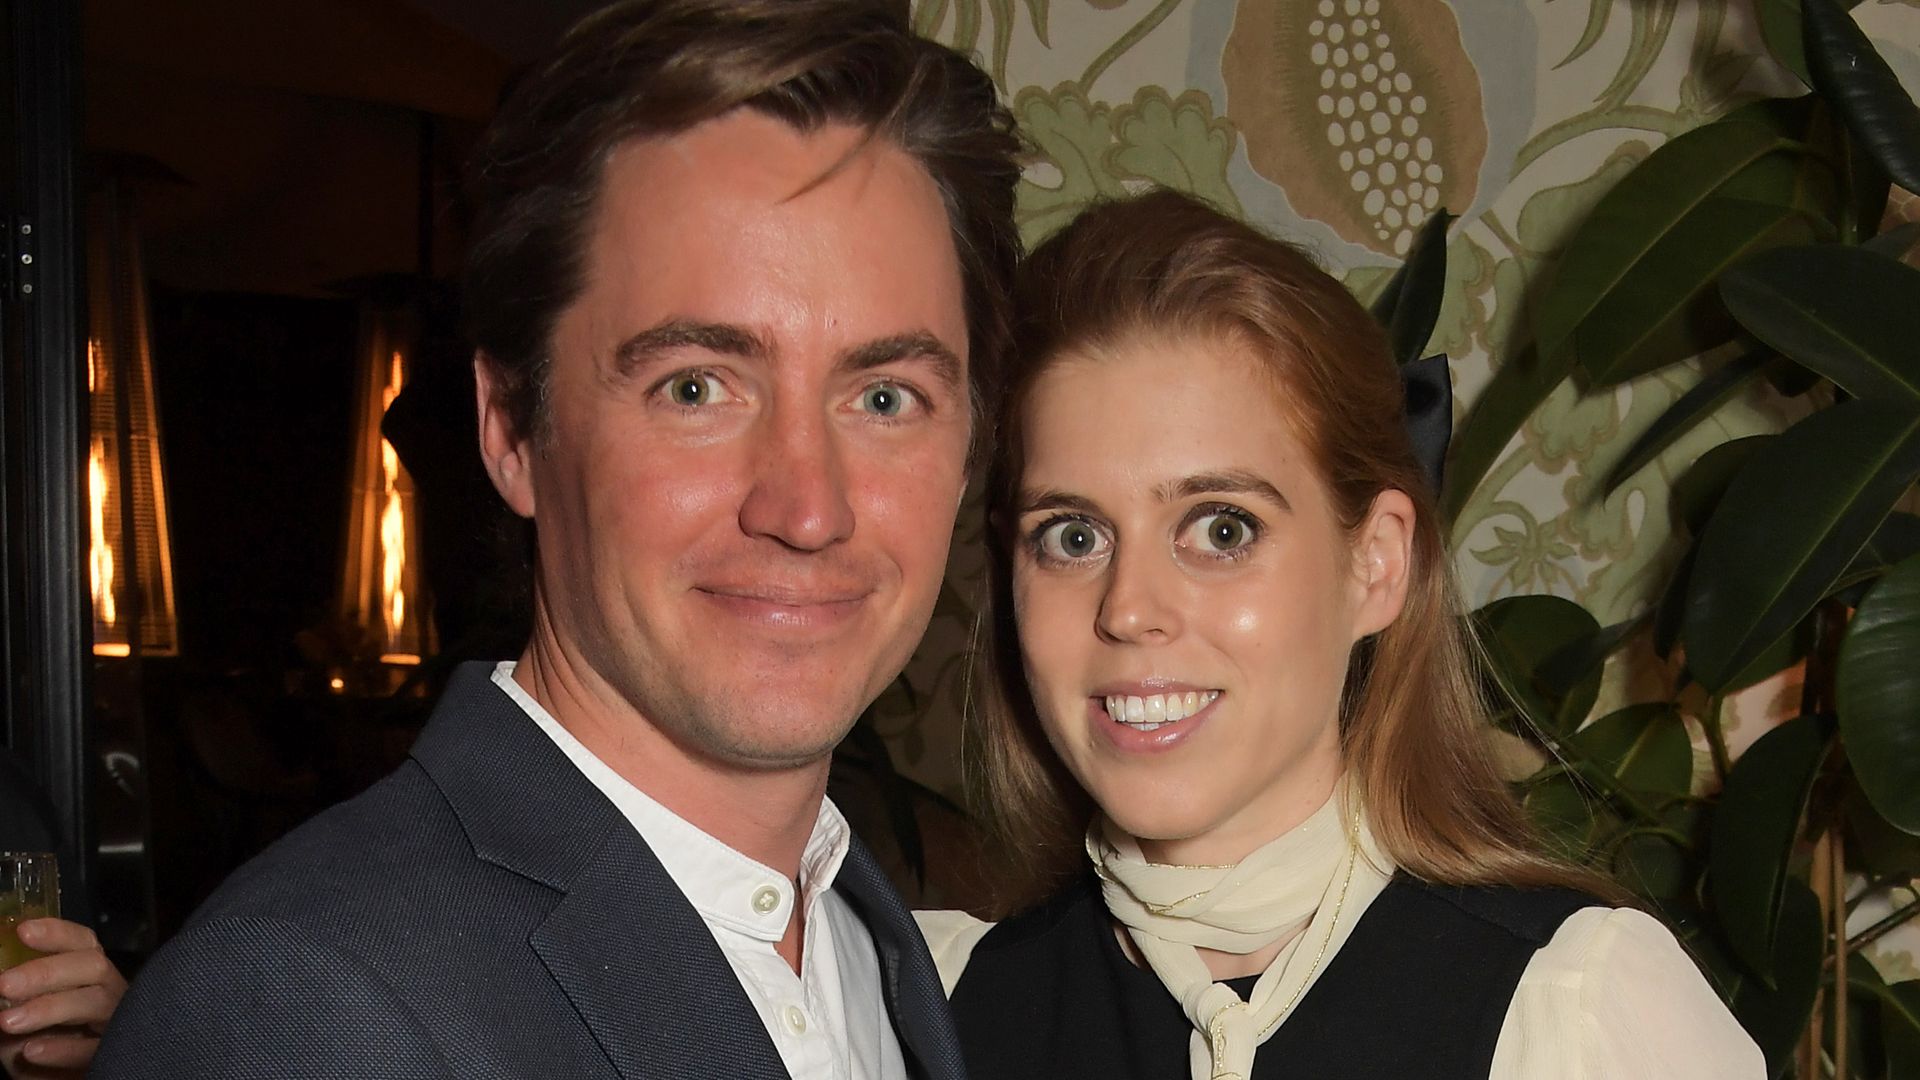 Edoardo Mapelli Mozzi in a suit and Princess Beatrice in a blouse